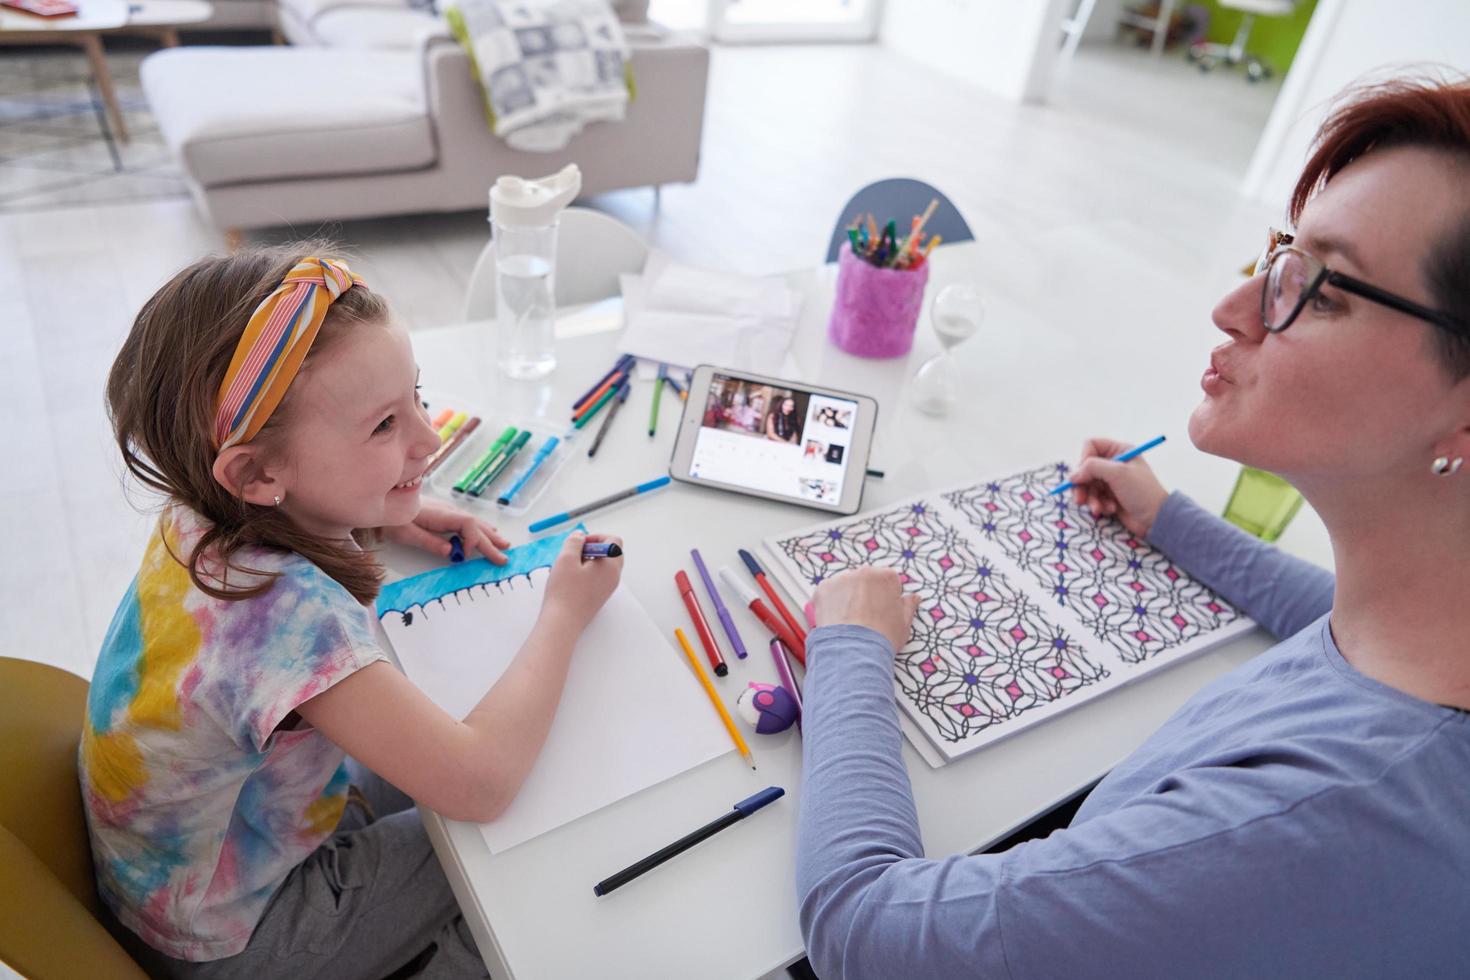 Mother and little daughter  playing together  drawing creative artwork photo